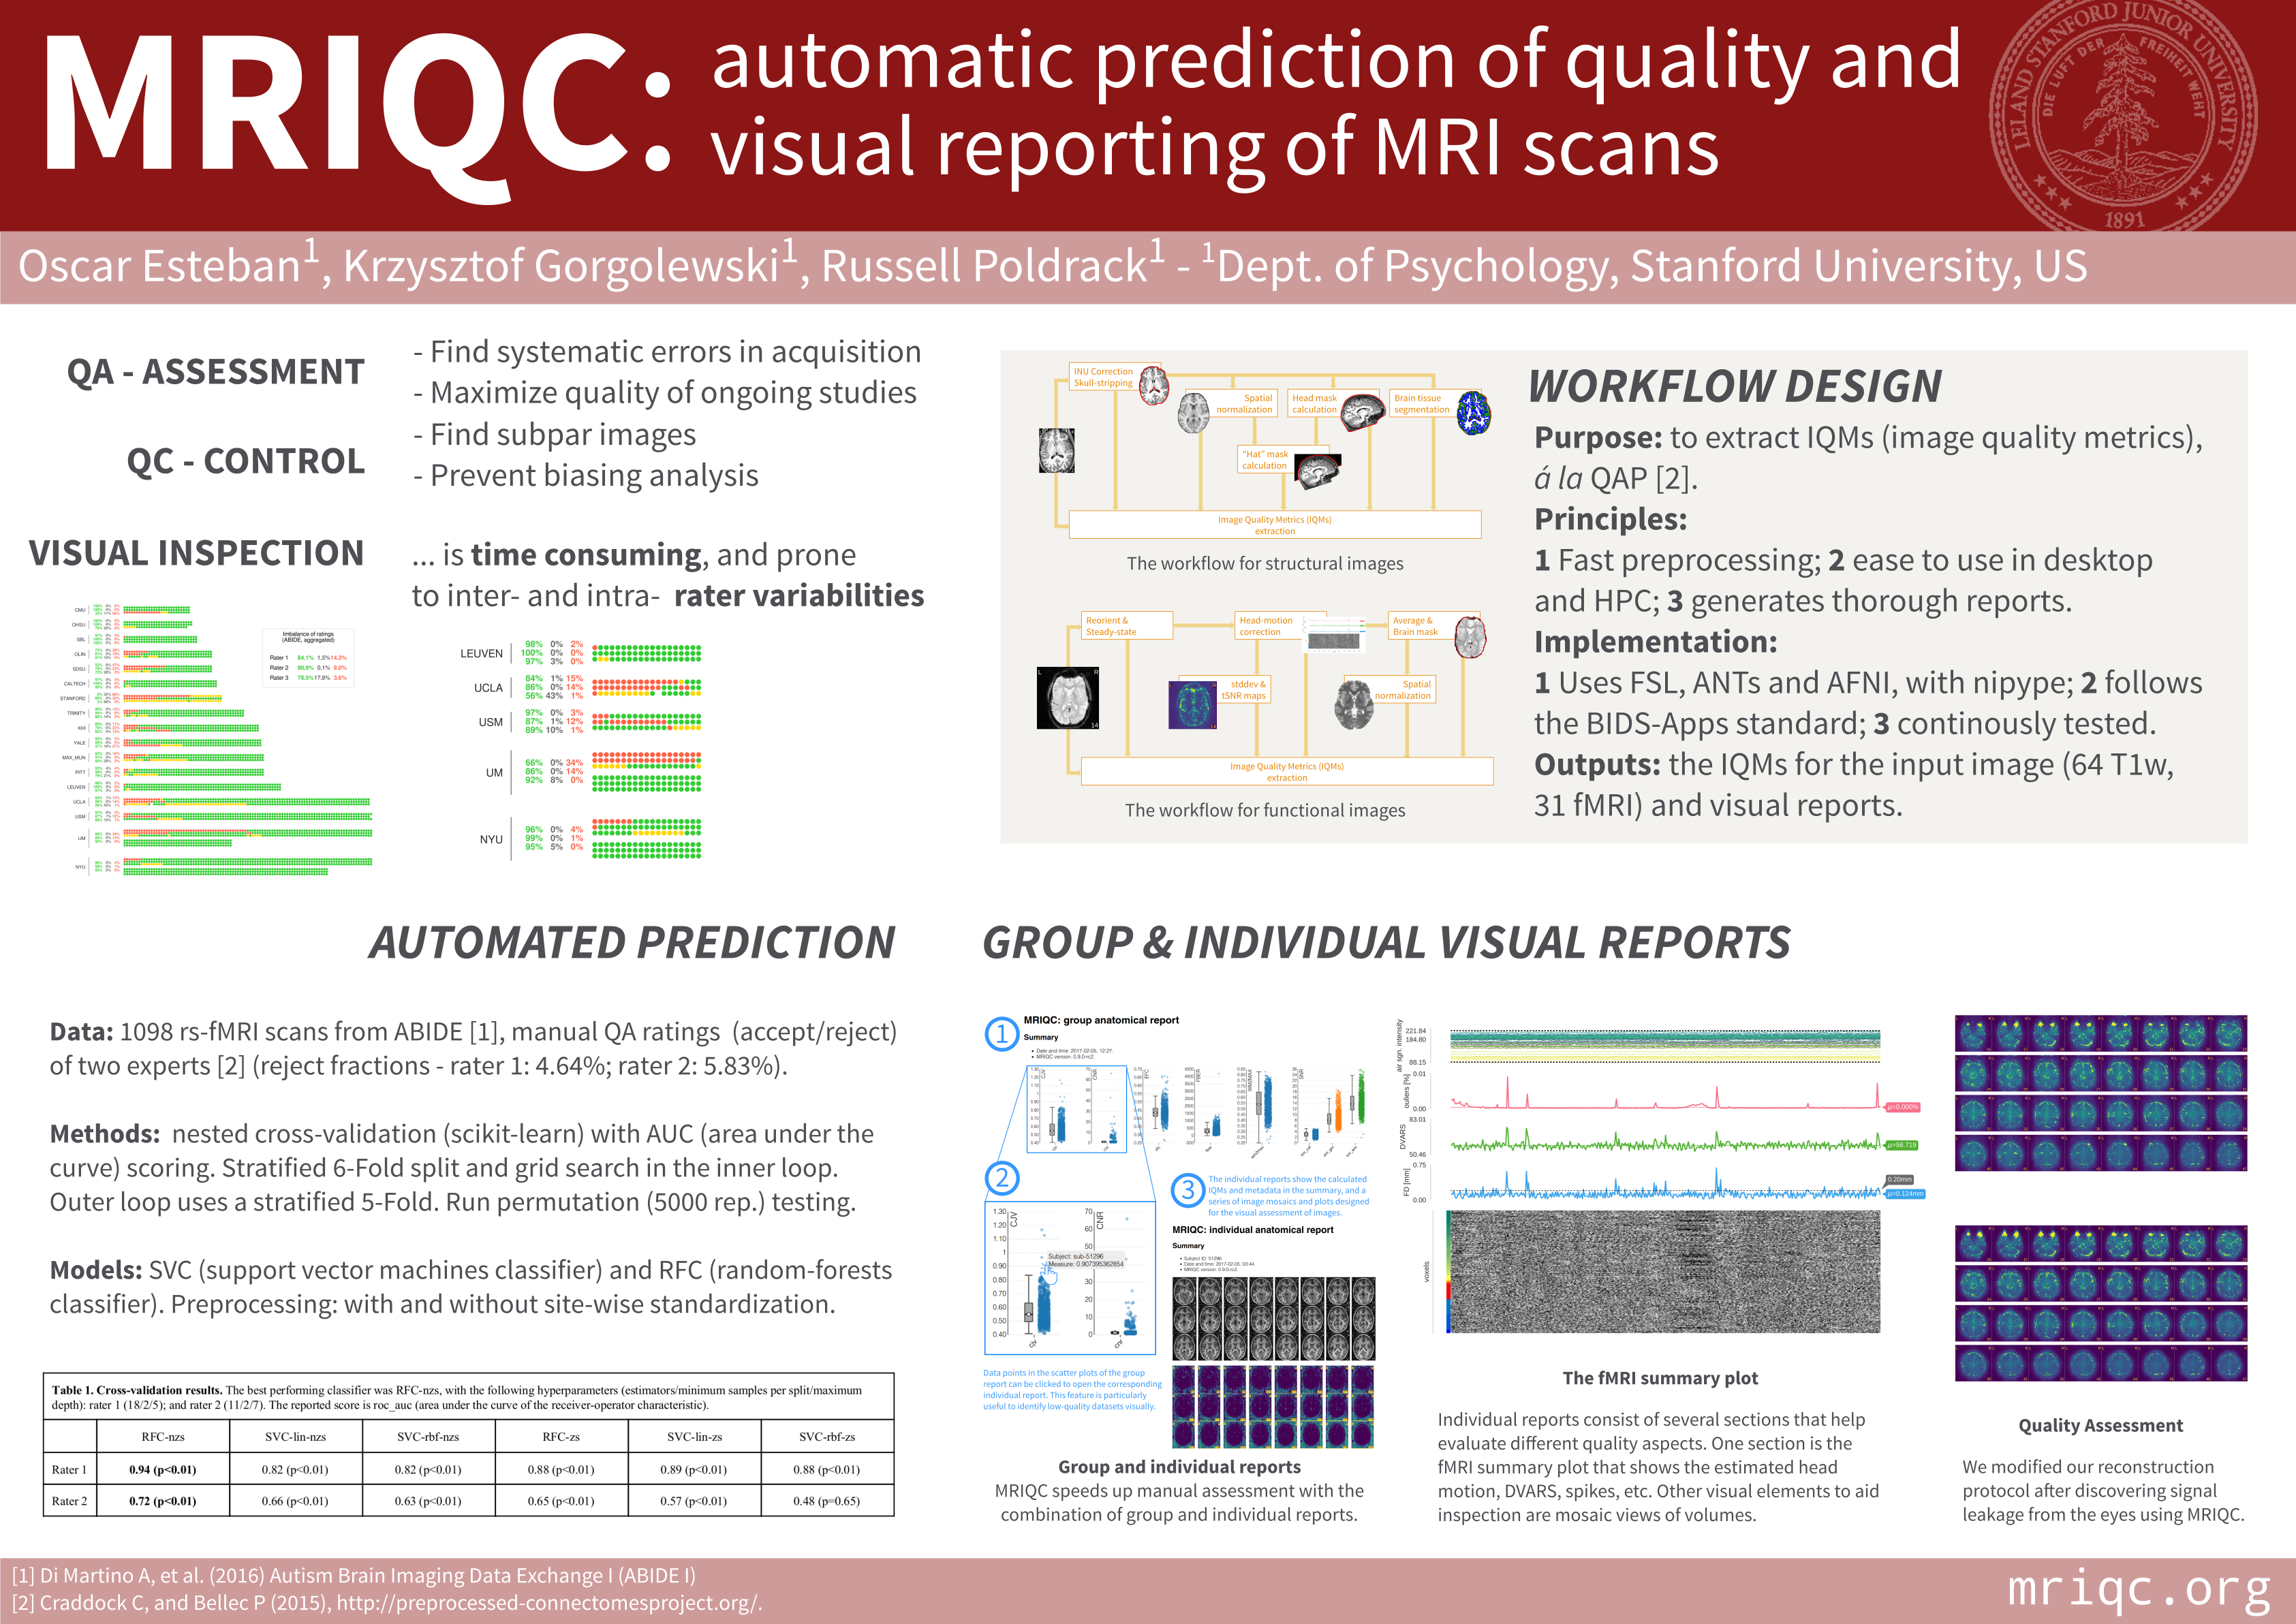 _images/OHBM2017-poster.png